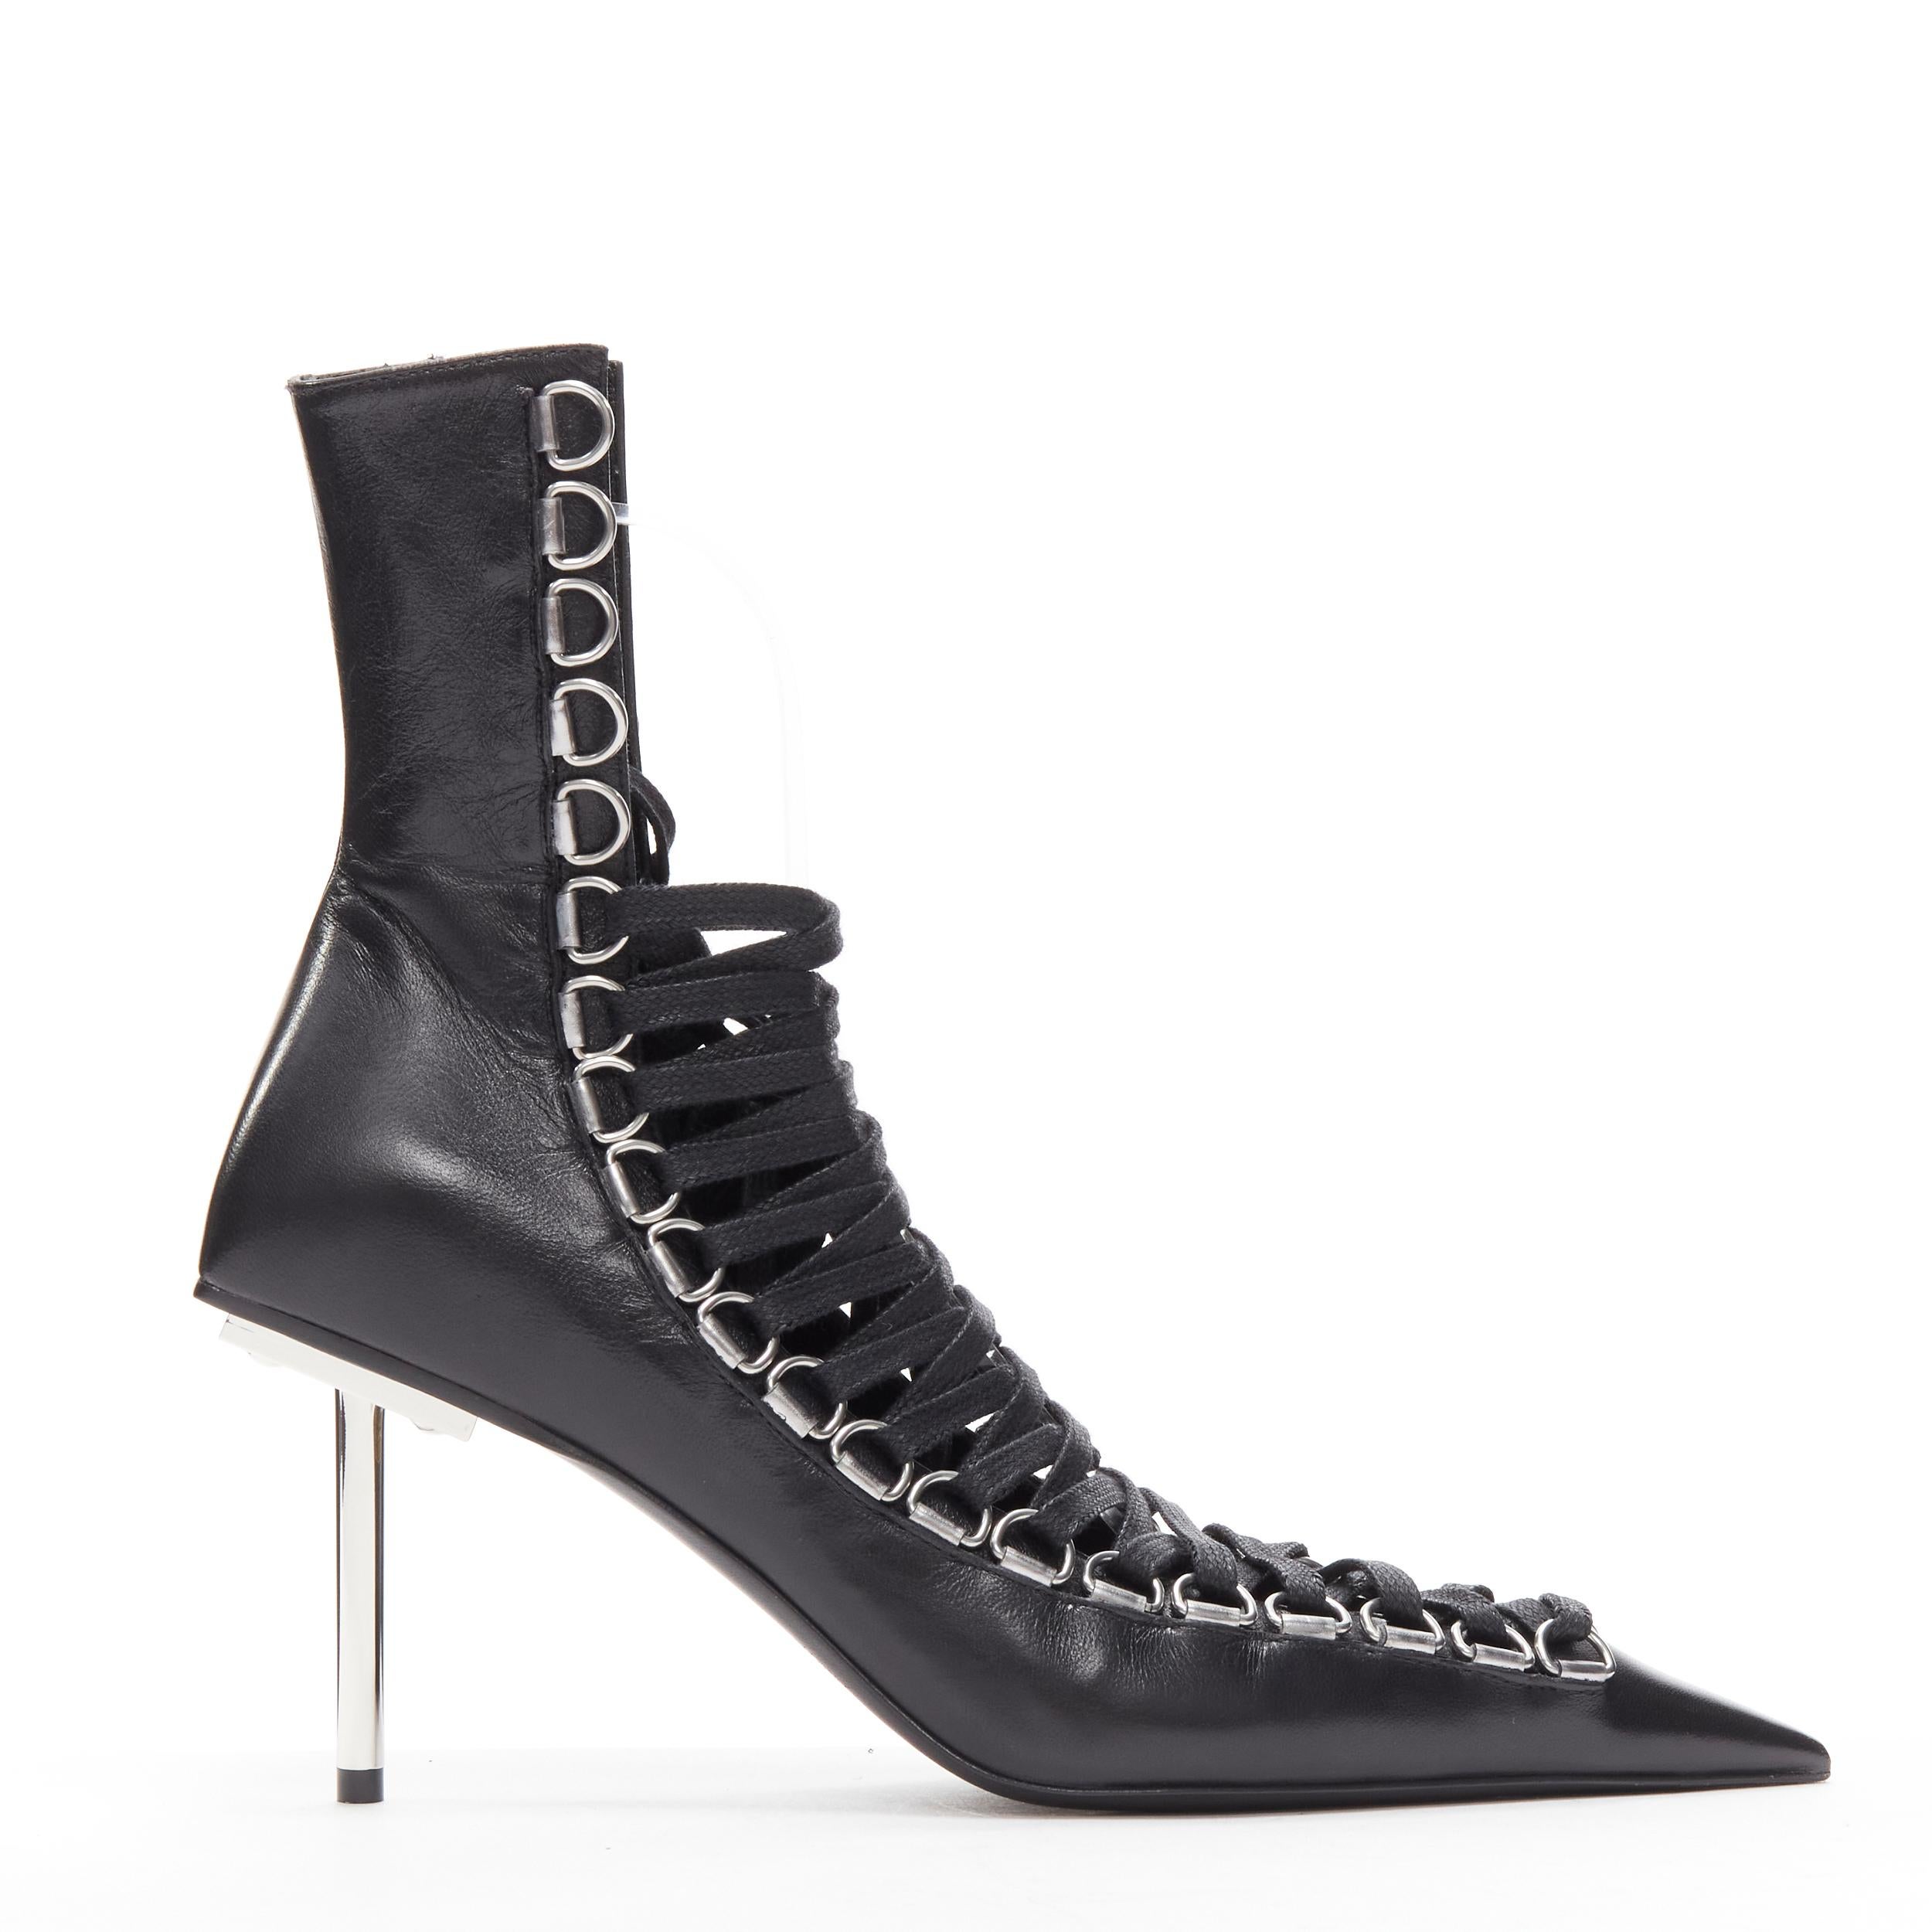 new BALENCIAGA Demna Runway Corset 80 black leather silver metal lace up bootie EU36
Reference: TGAS/D00596
Brand: Balenciaga
Designer: Demna
Model: Corset 80
Material: Leather, Metal
Color: Black, Silver
Pattern: Solid
Closure: Lace Up
Lining: